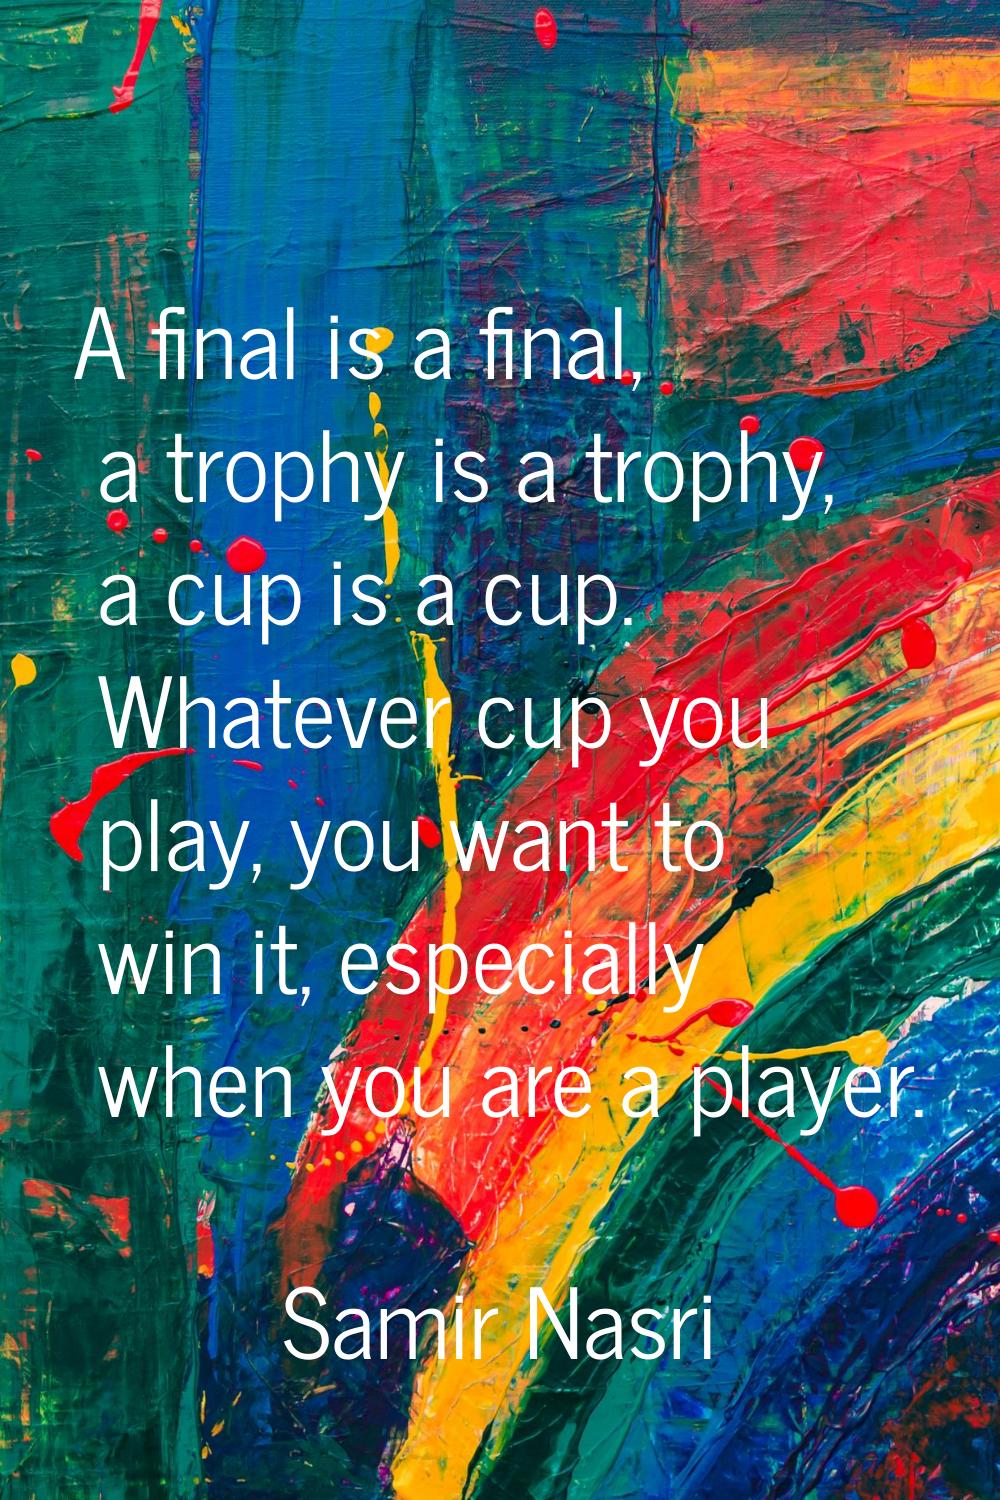 A final is a final, a trophy is a trophy, a cup is a cup. Whatever cup you play, you want to win it